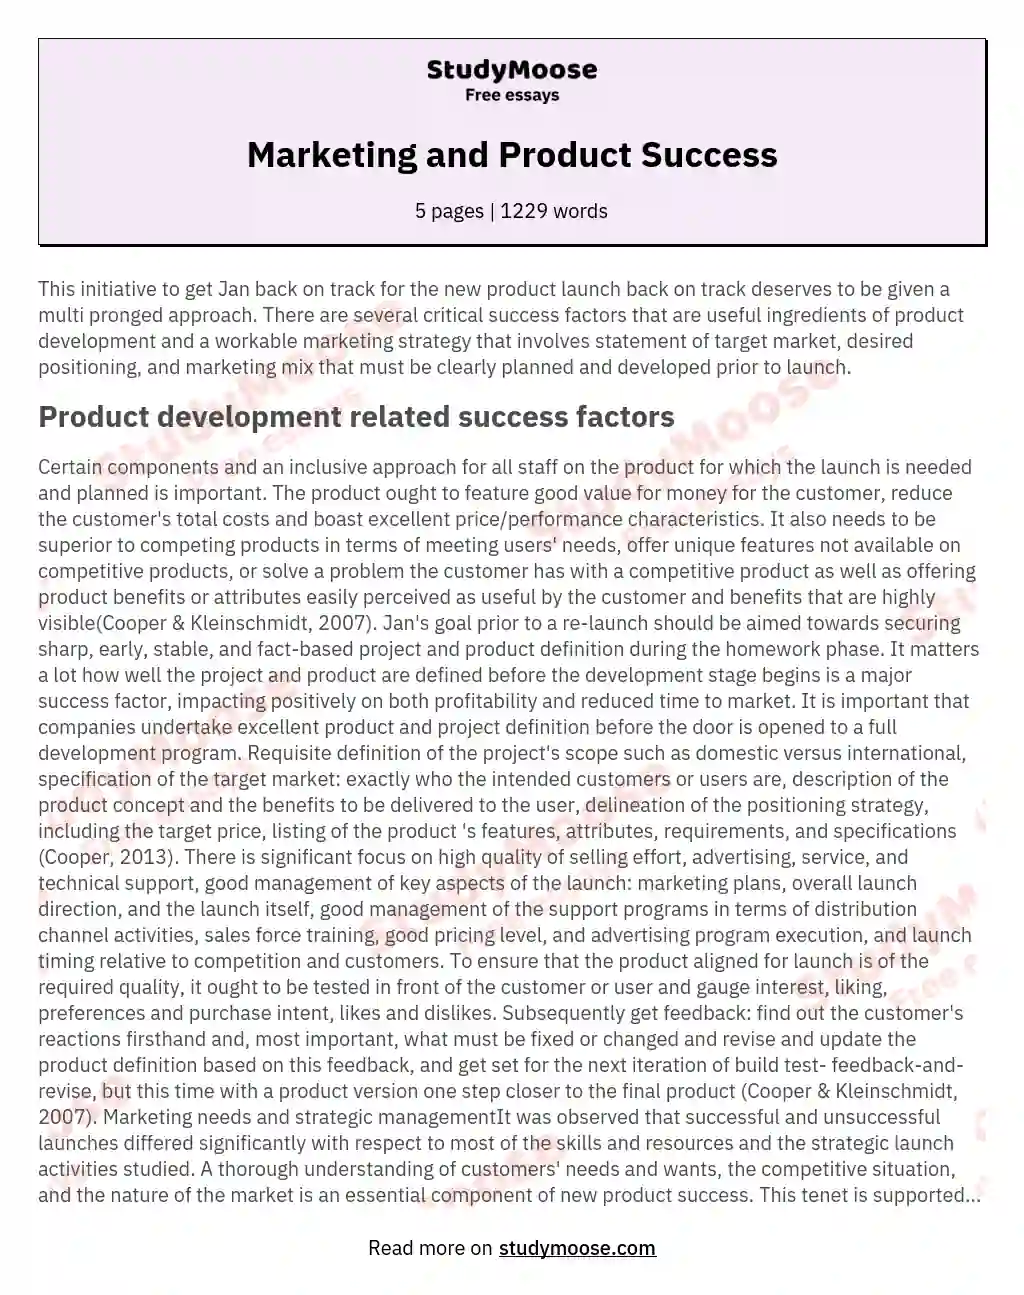 Marketing and Product Success essay